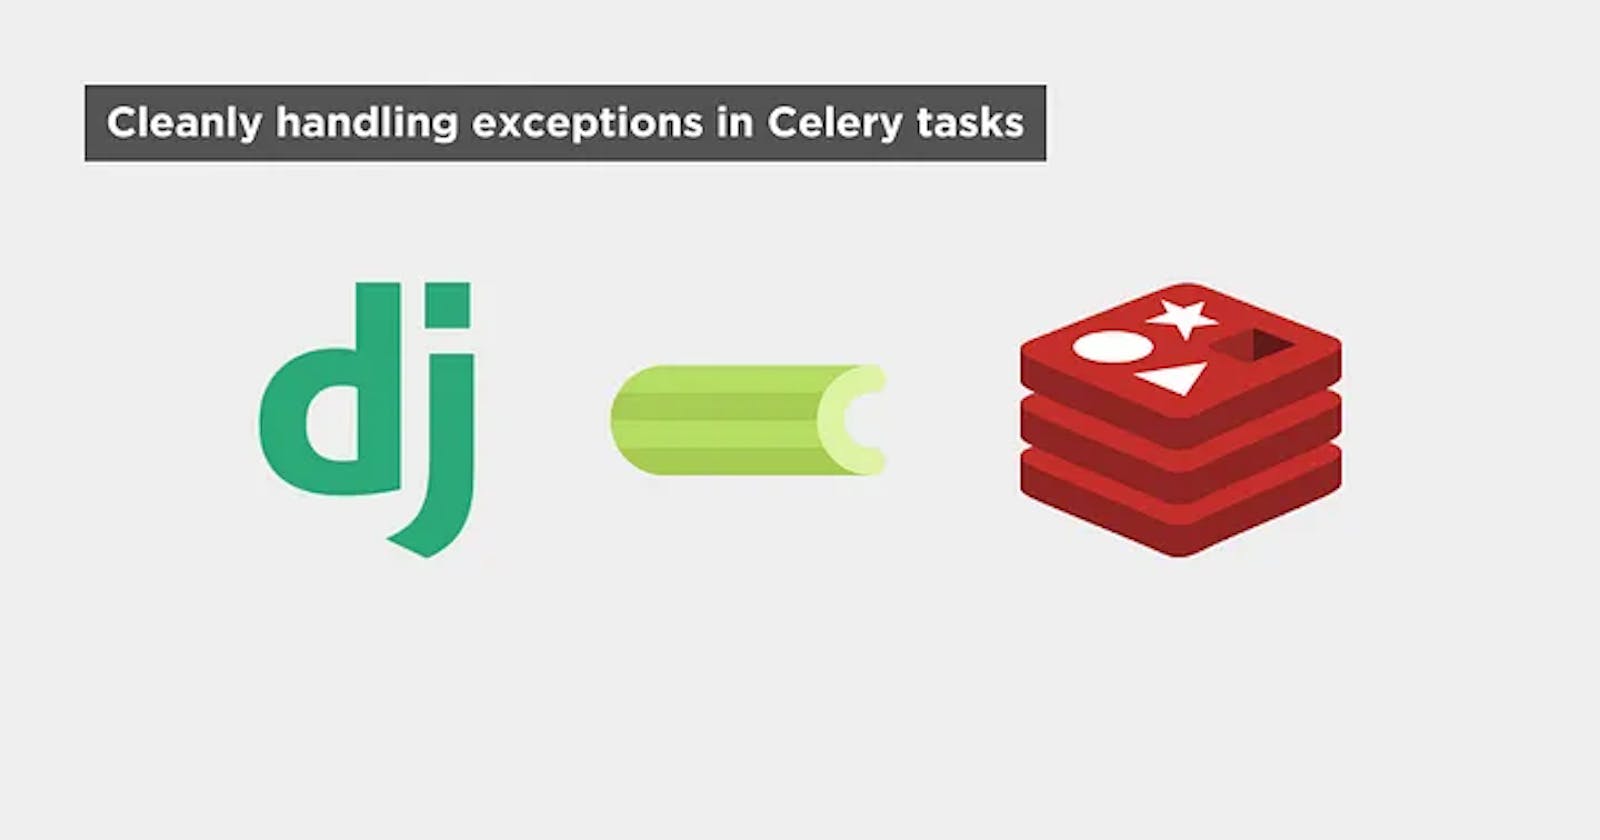 How to cleanly stop Celery tasks on conditions or exceptions